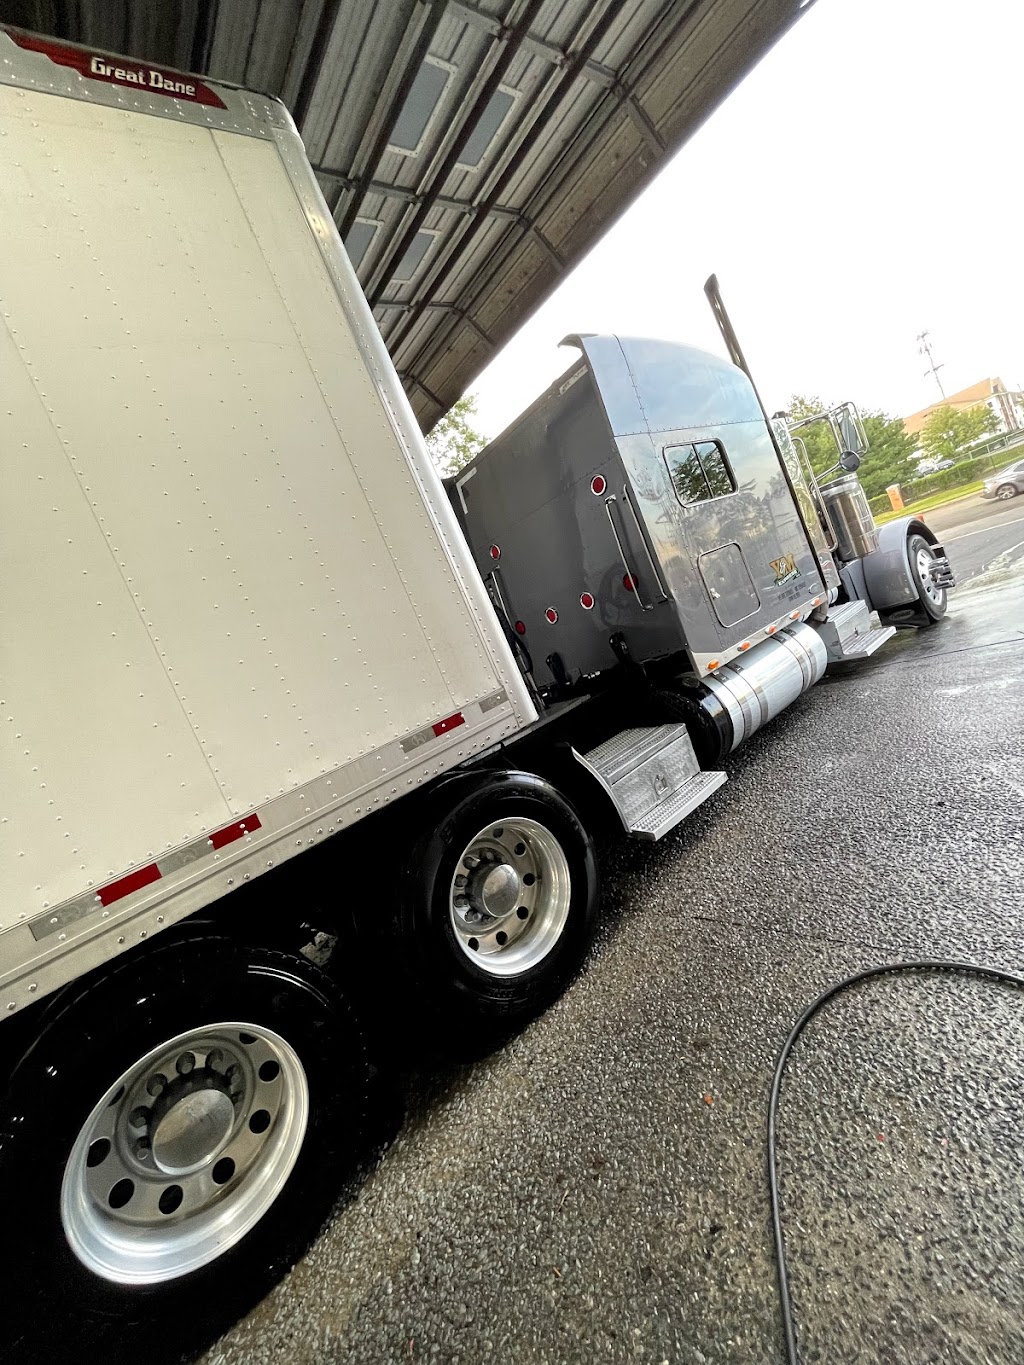 conoco truck wash /tires/repair | 120 Middlesex Ave, Carteret, NJ 07008 | Phone: (732) 609-1002